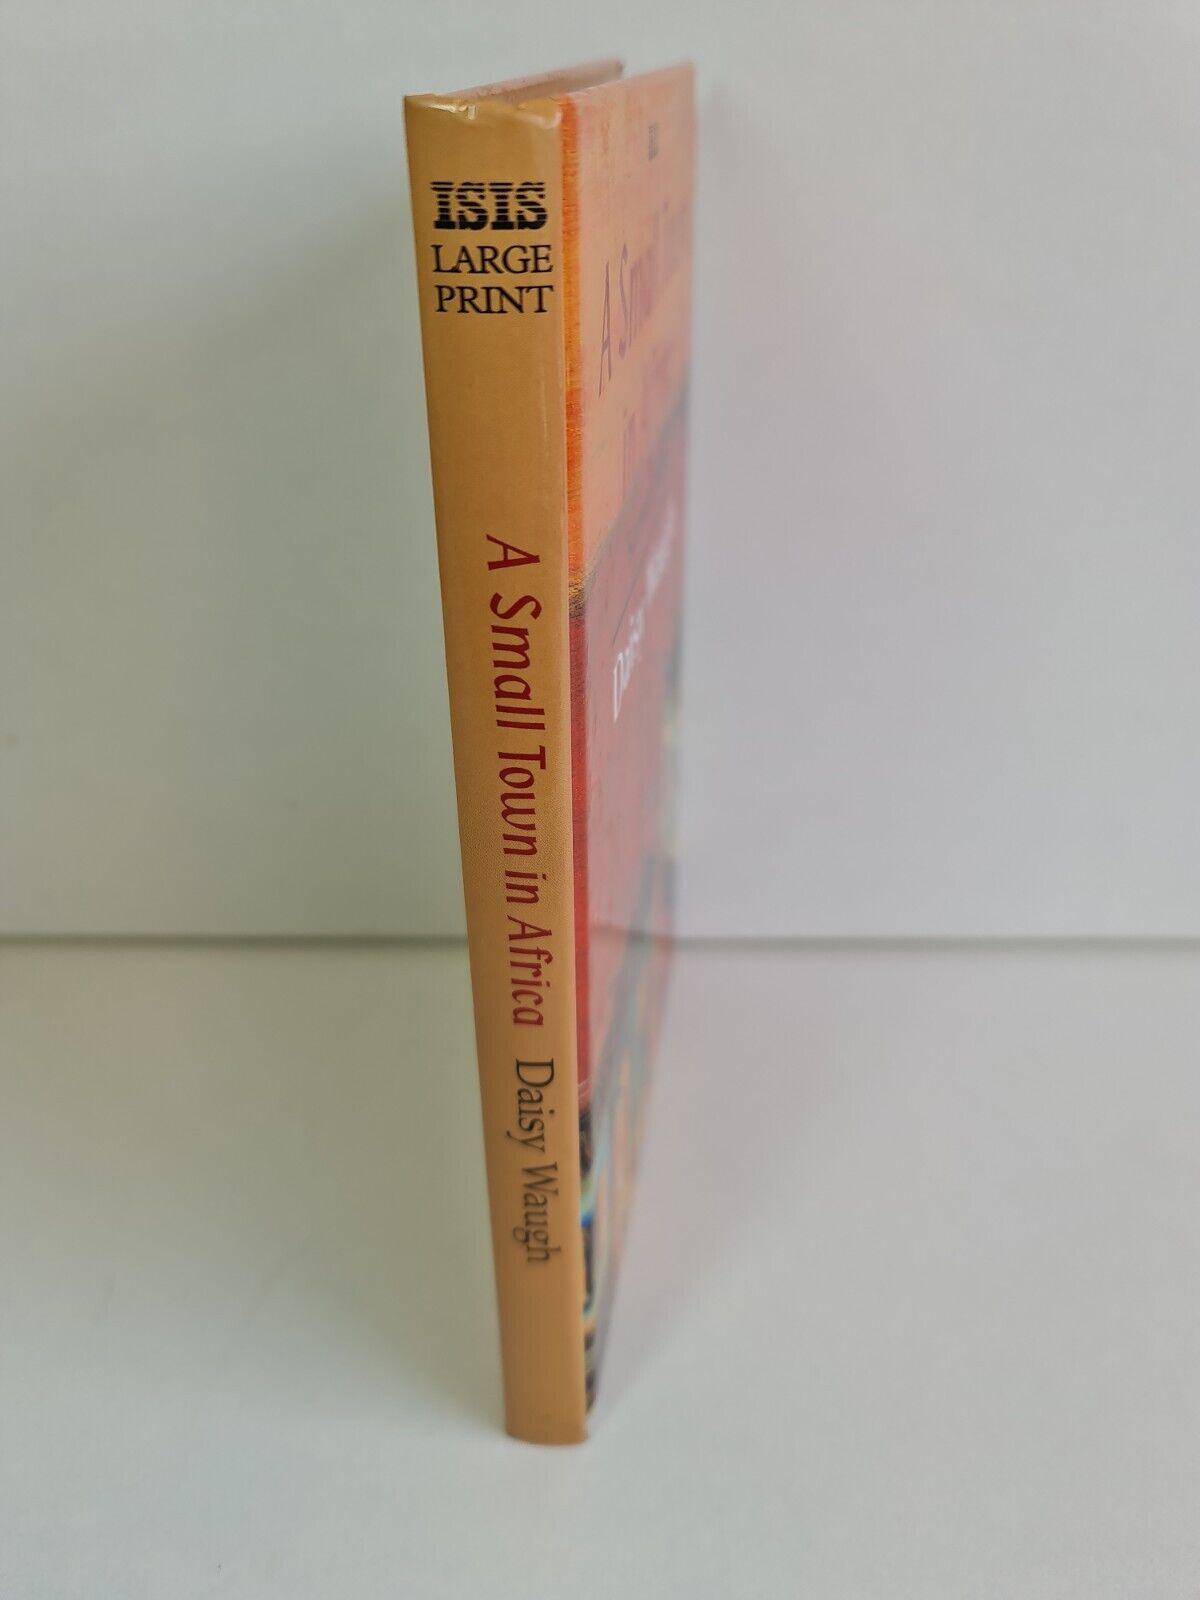 A Small Town in Africa by Daisy Waugh (1995 -ISIS Large Print)